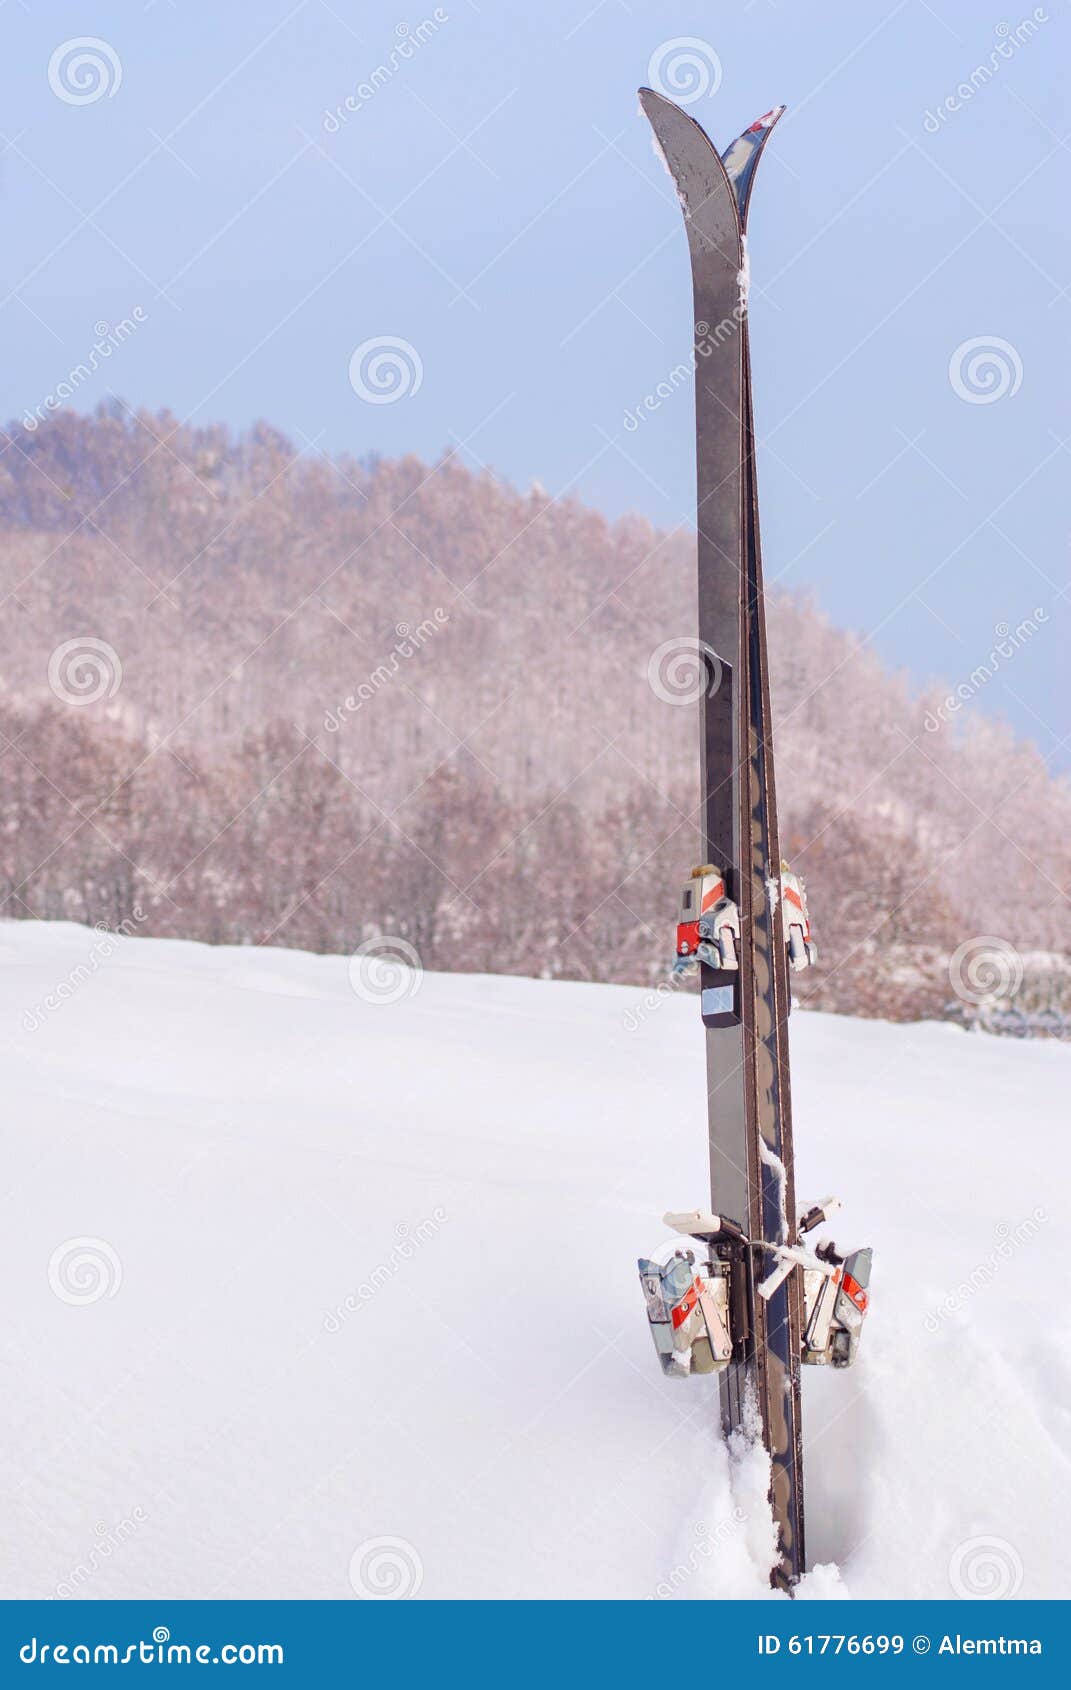 Pair of Ski in the Snow Standing Vertically Stock Image - Image of ...